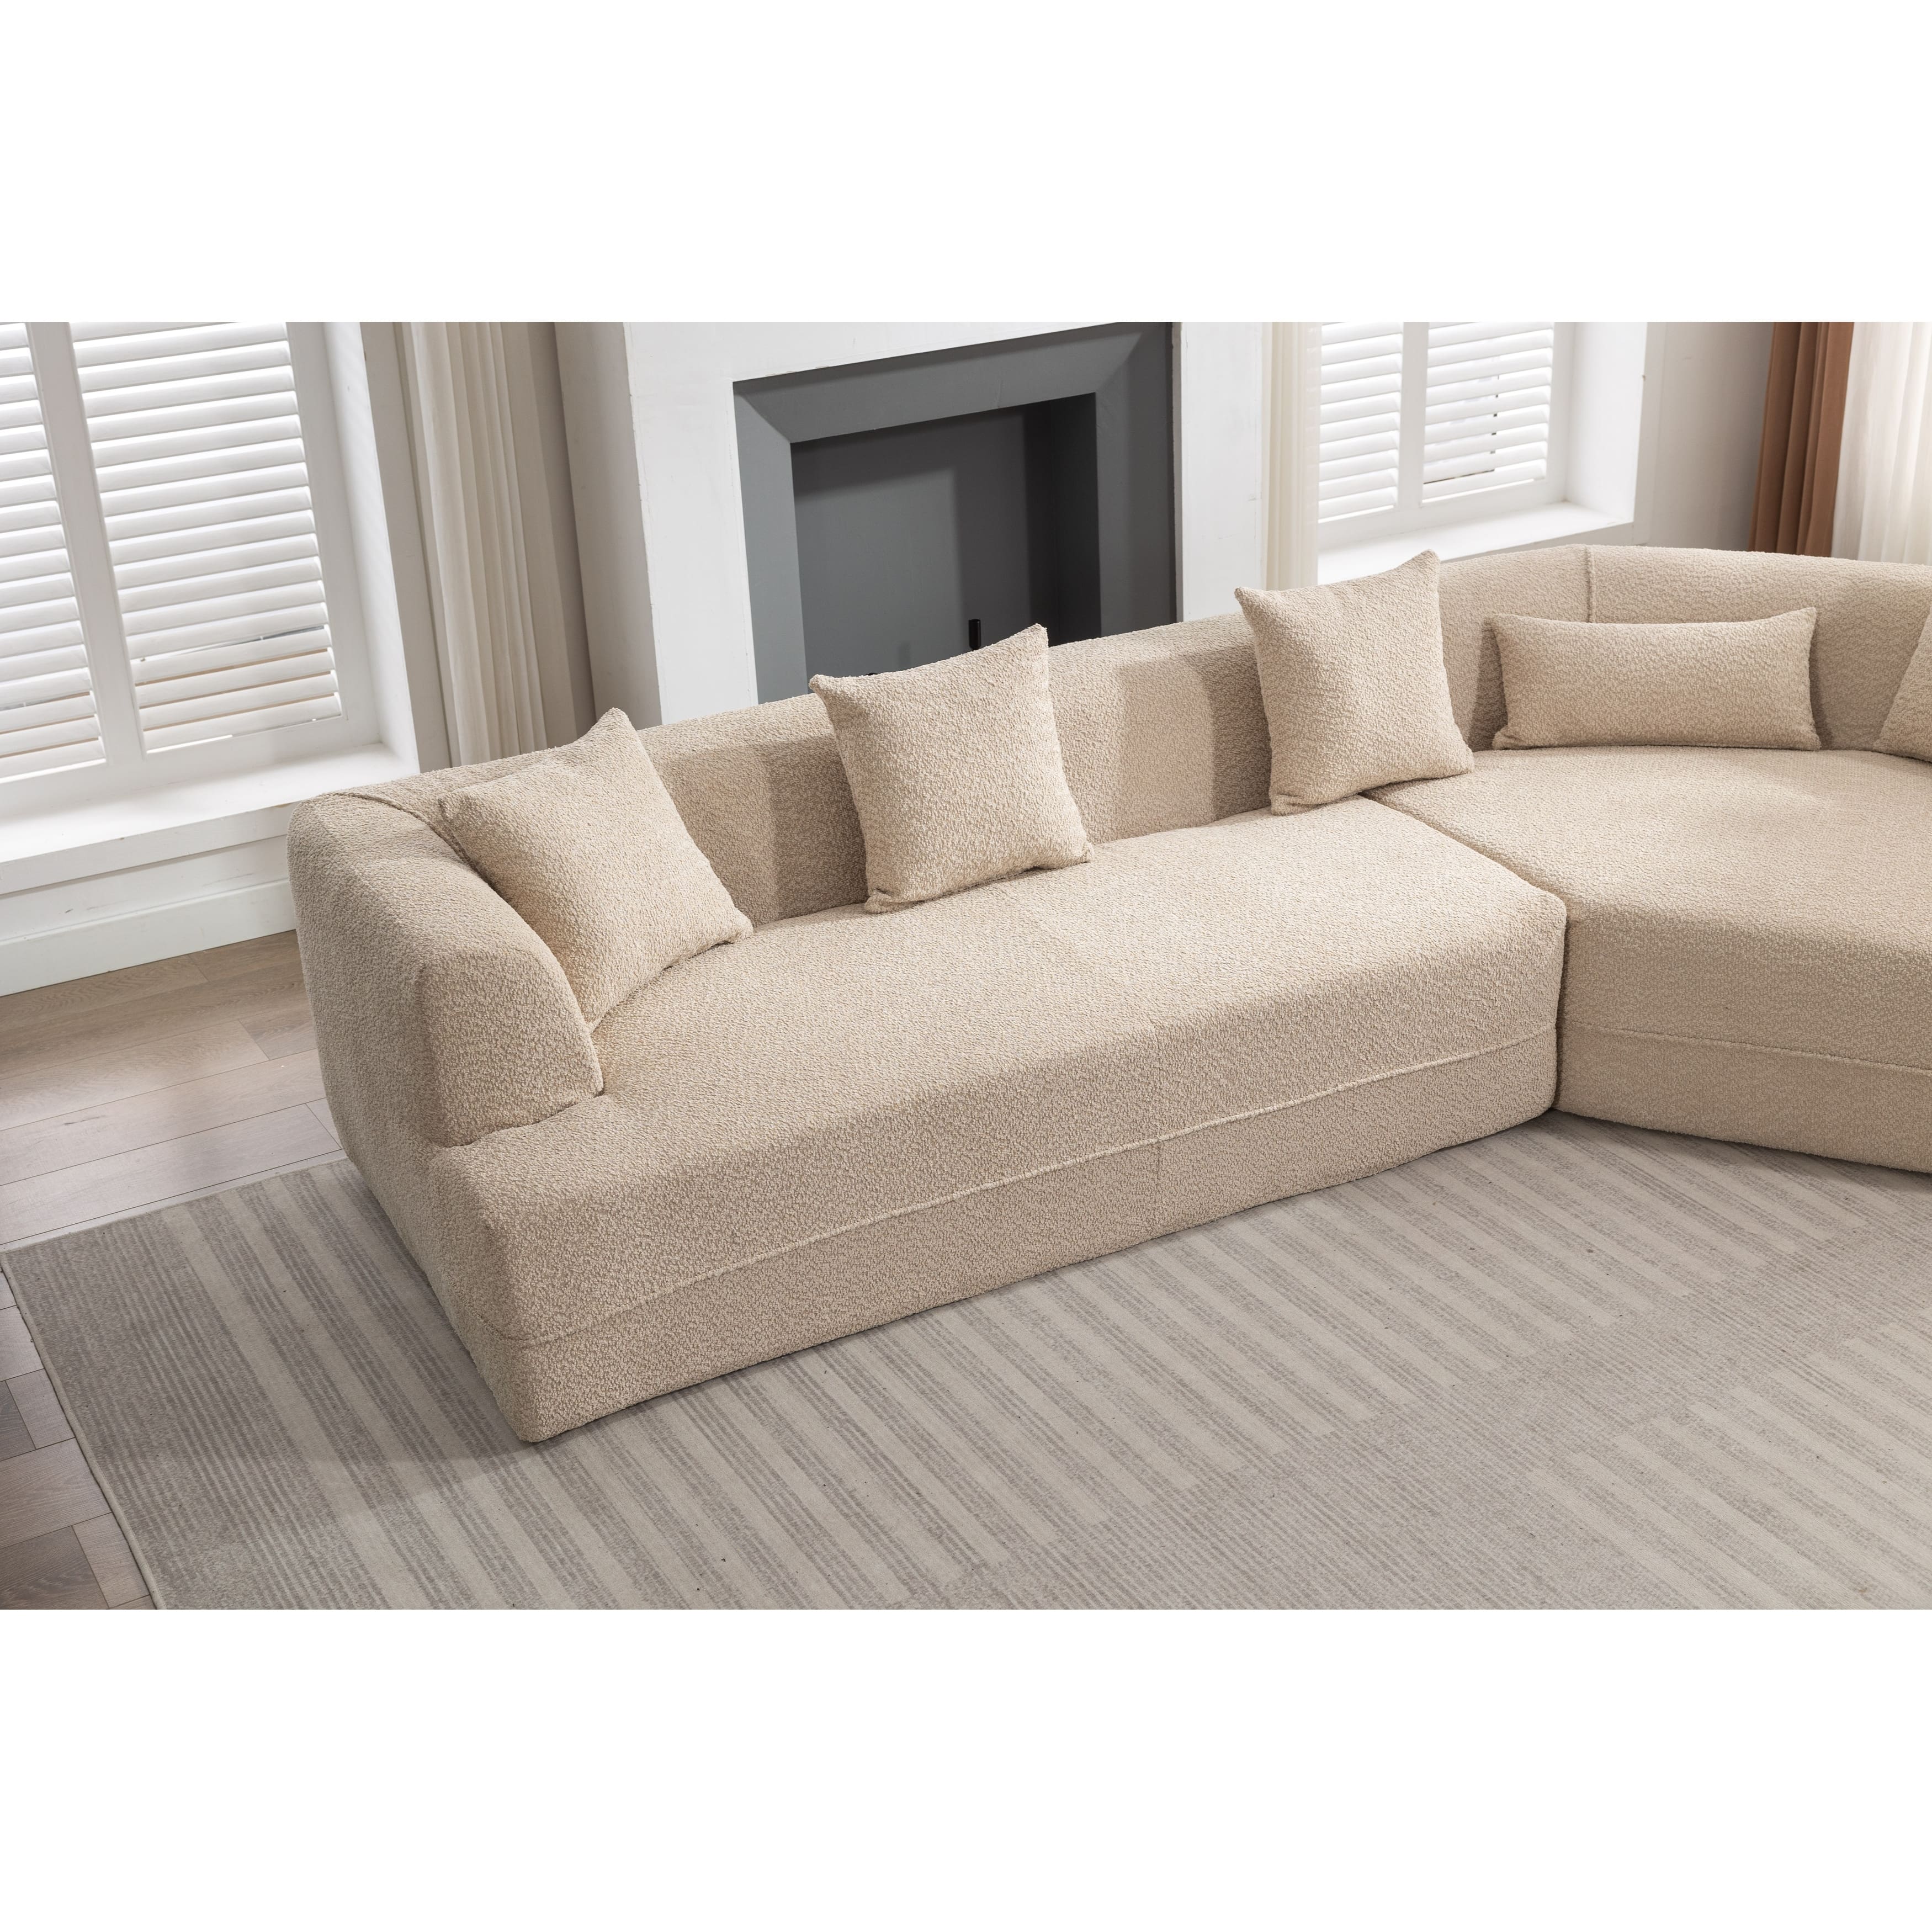 Brown Gray Floor Sectional Loveseat Sofa Sets Boucle Lazy Modular Couch ...